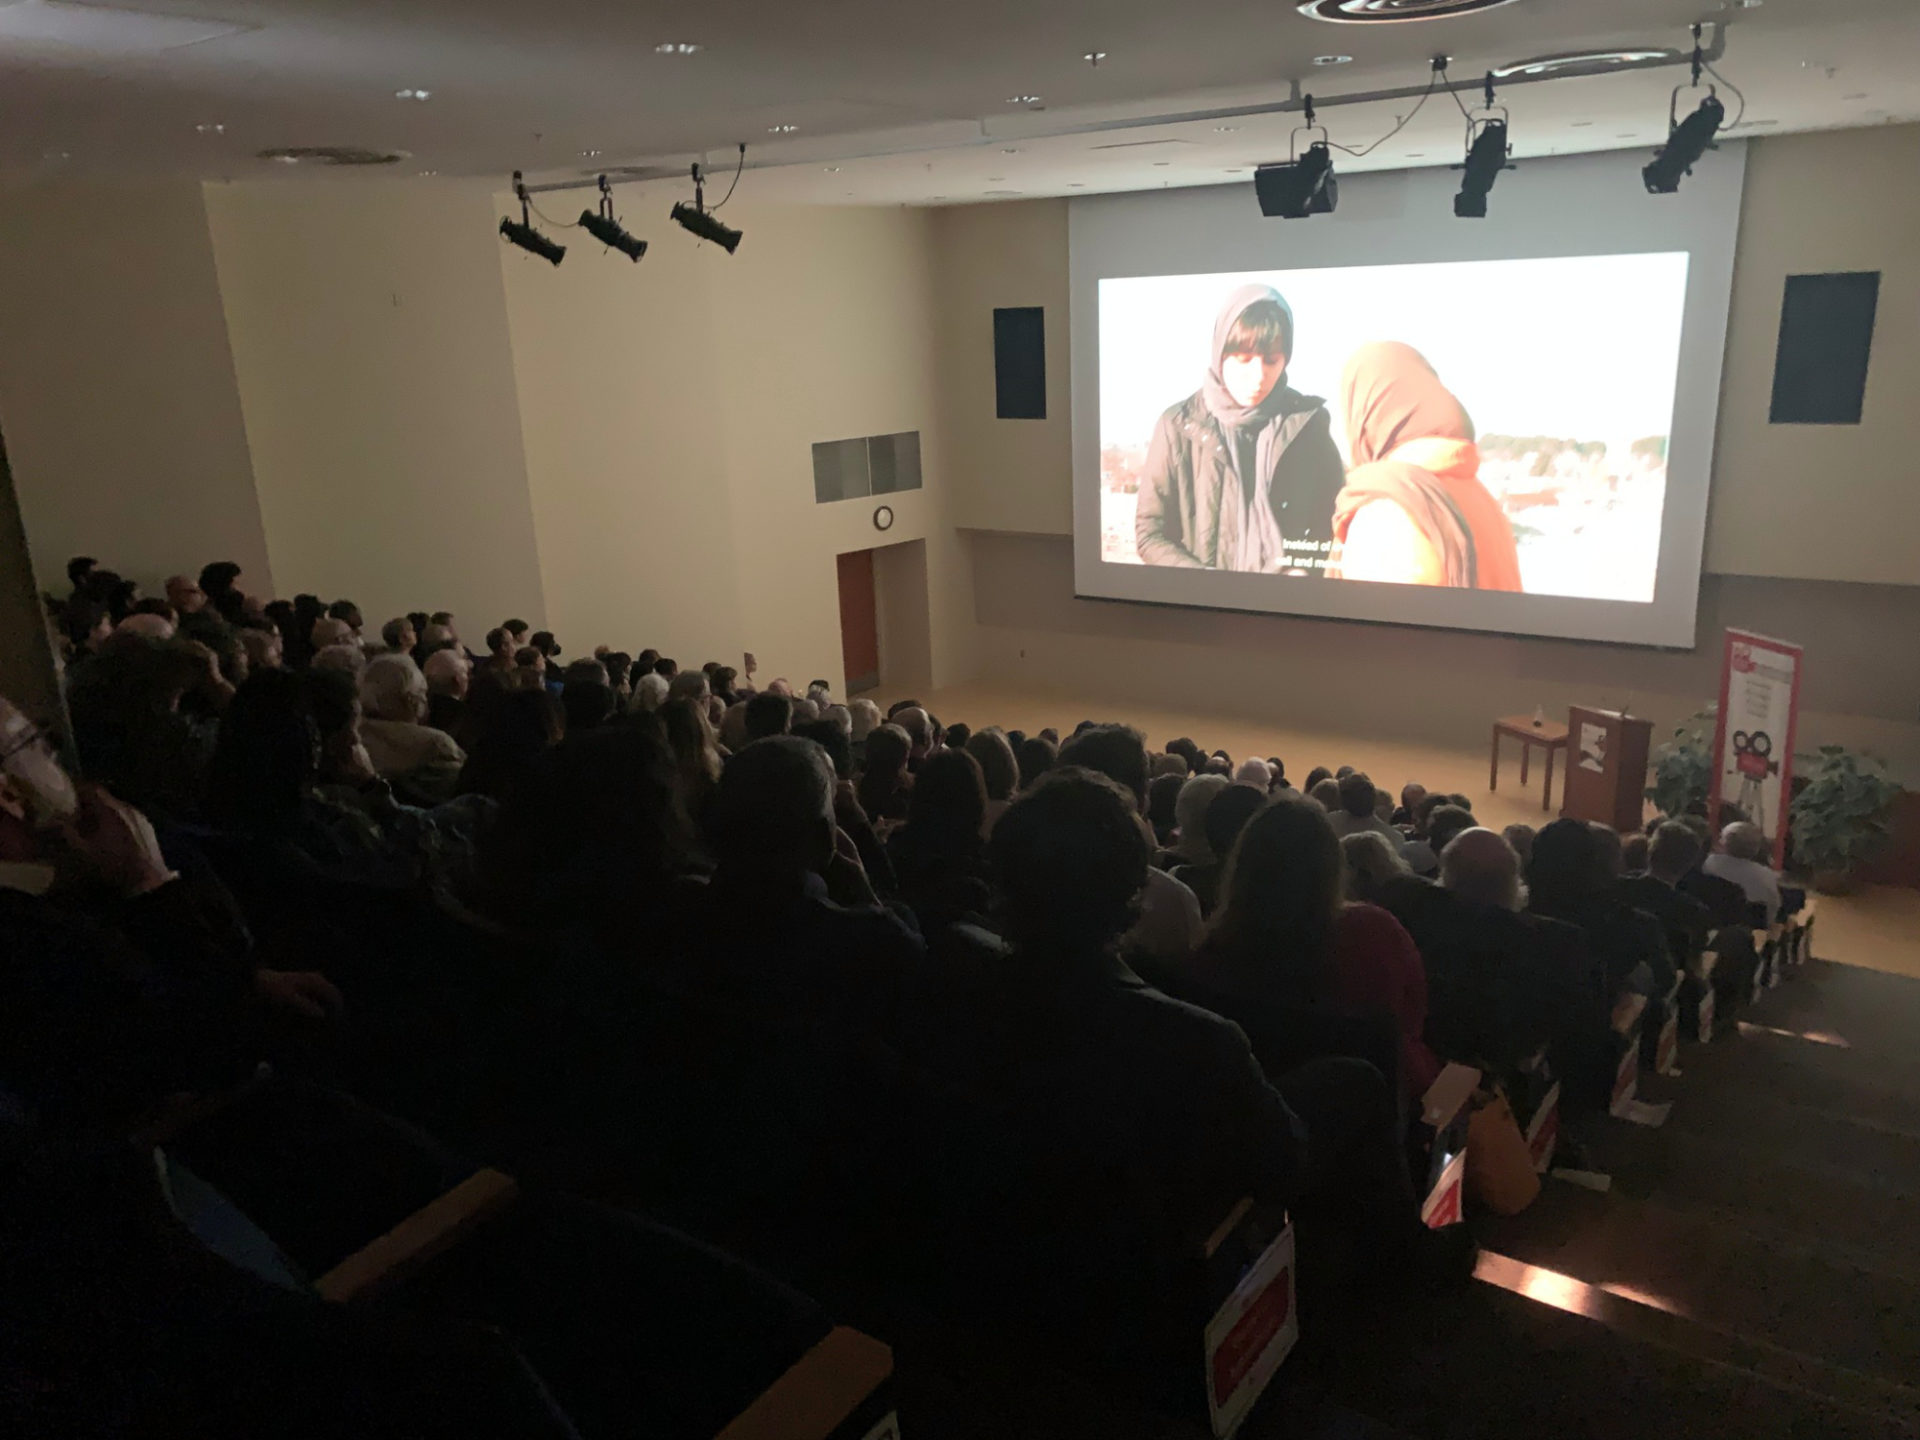 A packed audience in an auditorium watch a film screening. On the screen are two people wearing head coverings and winter coats.